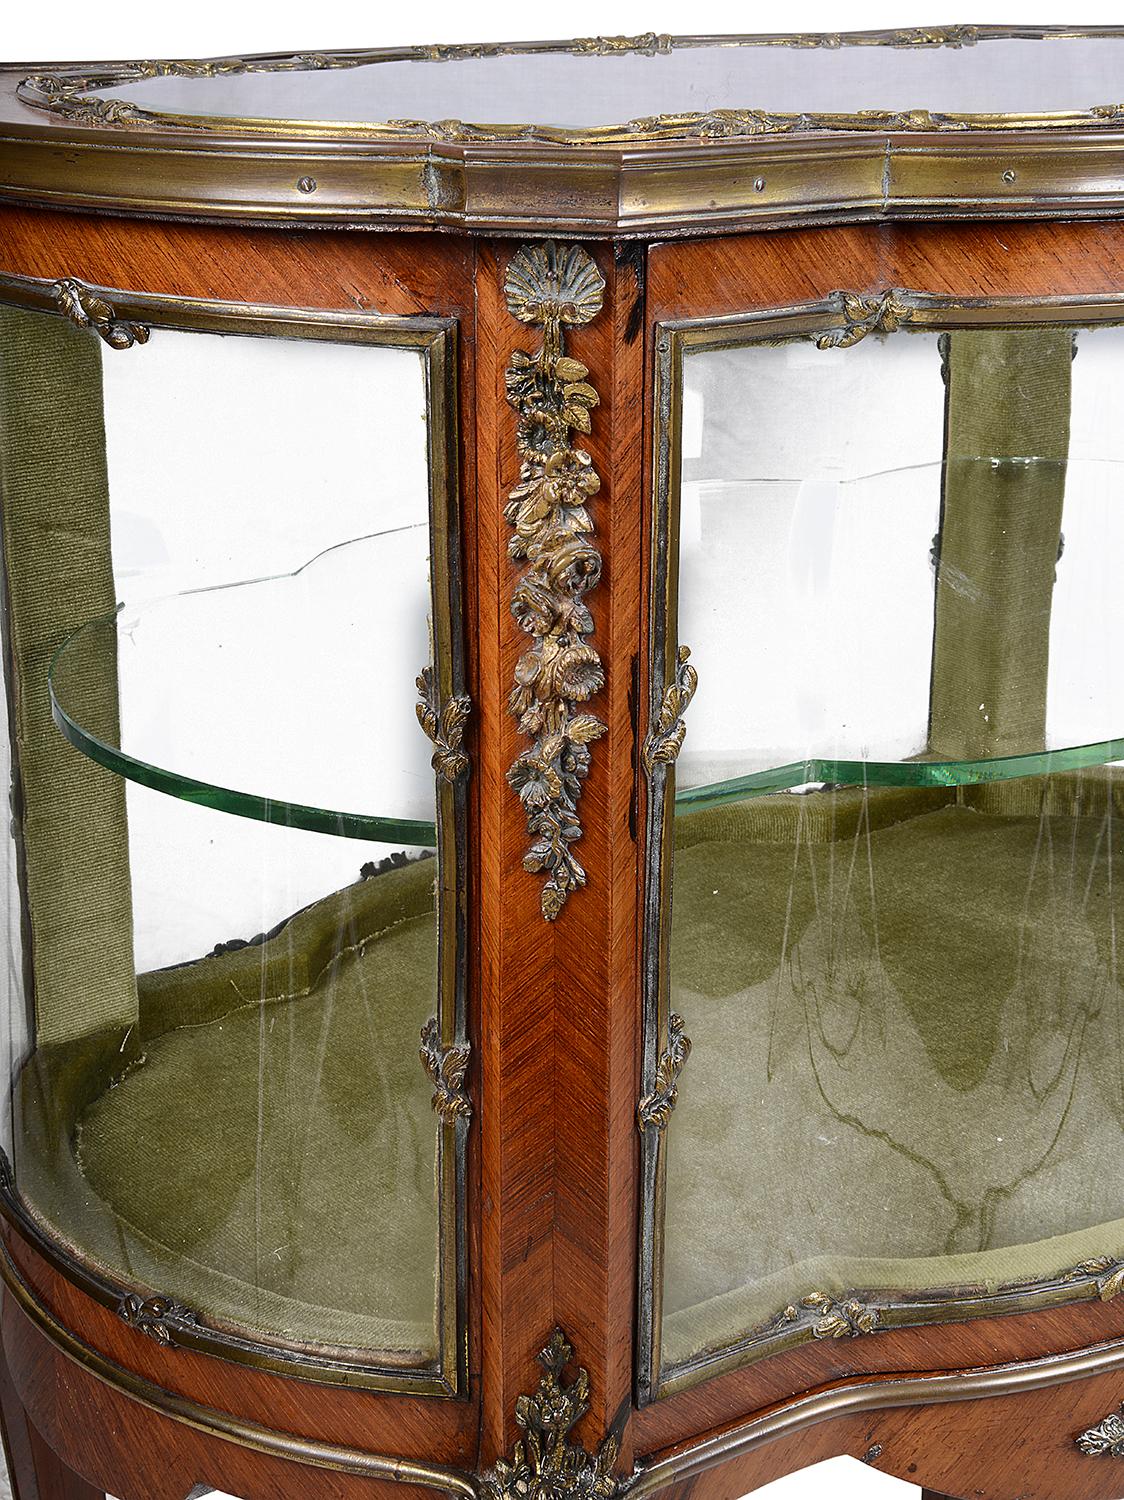 A very good quality late 19th century French ormolu-mounted free standing vitrine. Having bowed glass to the ends, a door to open with a glass shelf within. Classical floral and folate gilded ormolu mounts, raised on elegant cabriole legs and